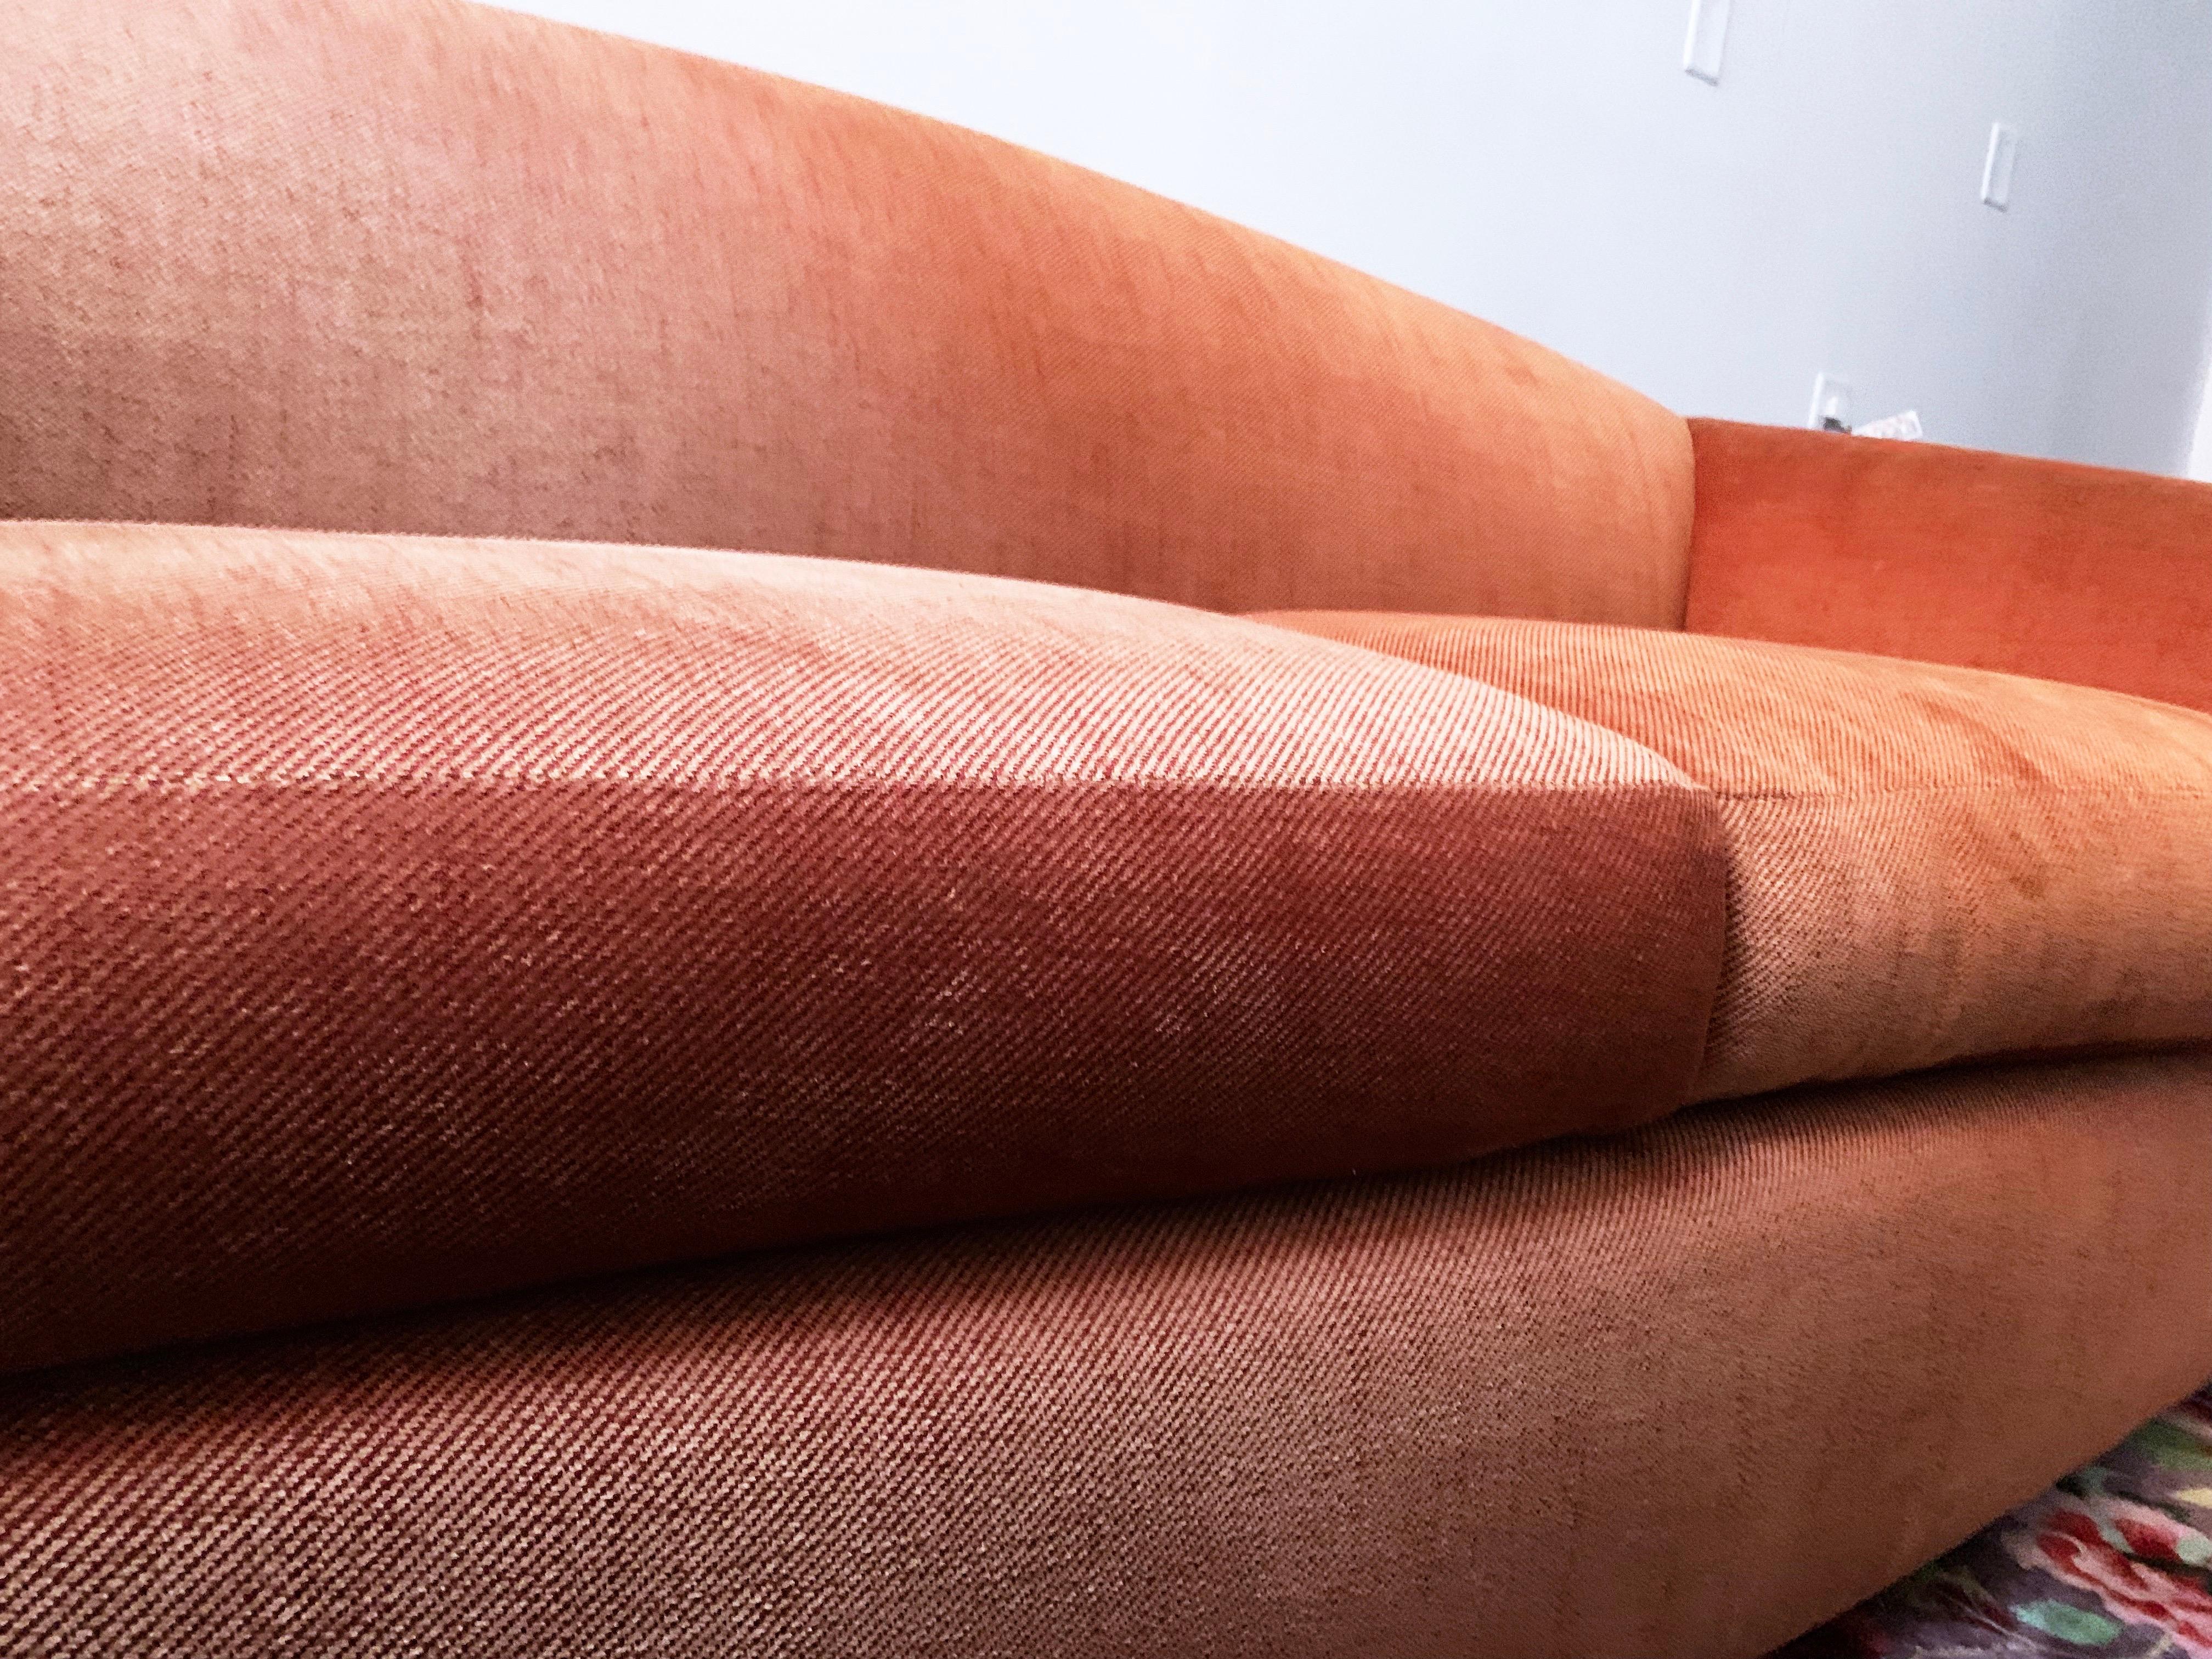 Robert Venturi for Knoll ‘Grandma’ Postmodern sofa Rasberry orange Chenille 1984, rare piece. Gorgeous lines. From the famed architects 1984 collaboration with Knoll. Iconic curved back and delightful, proportions, super comfortable as well. Very